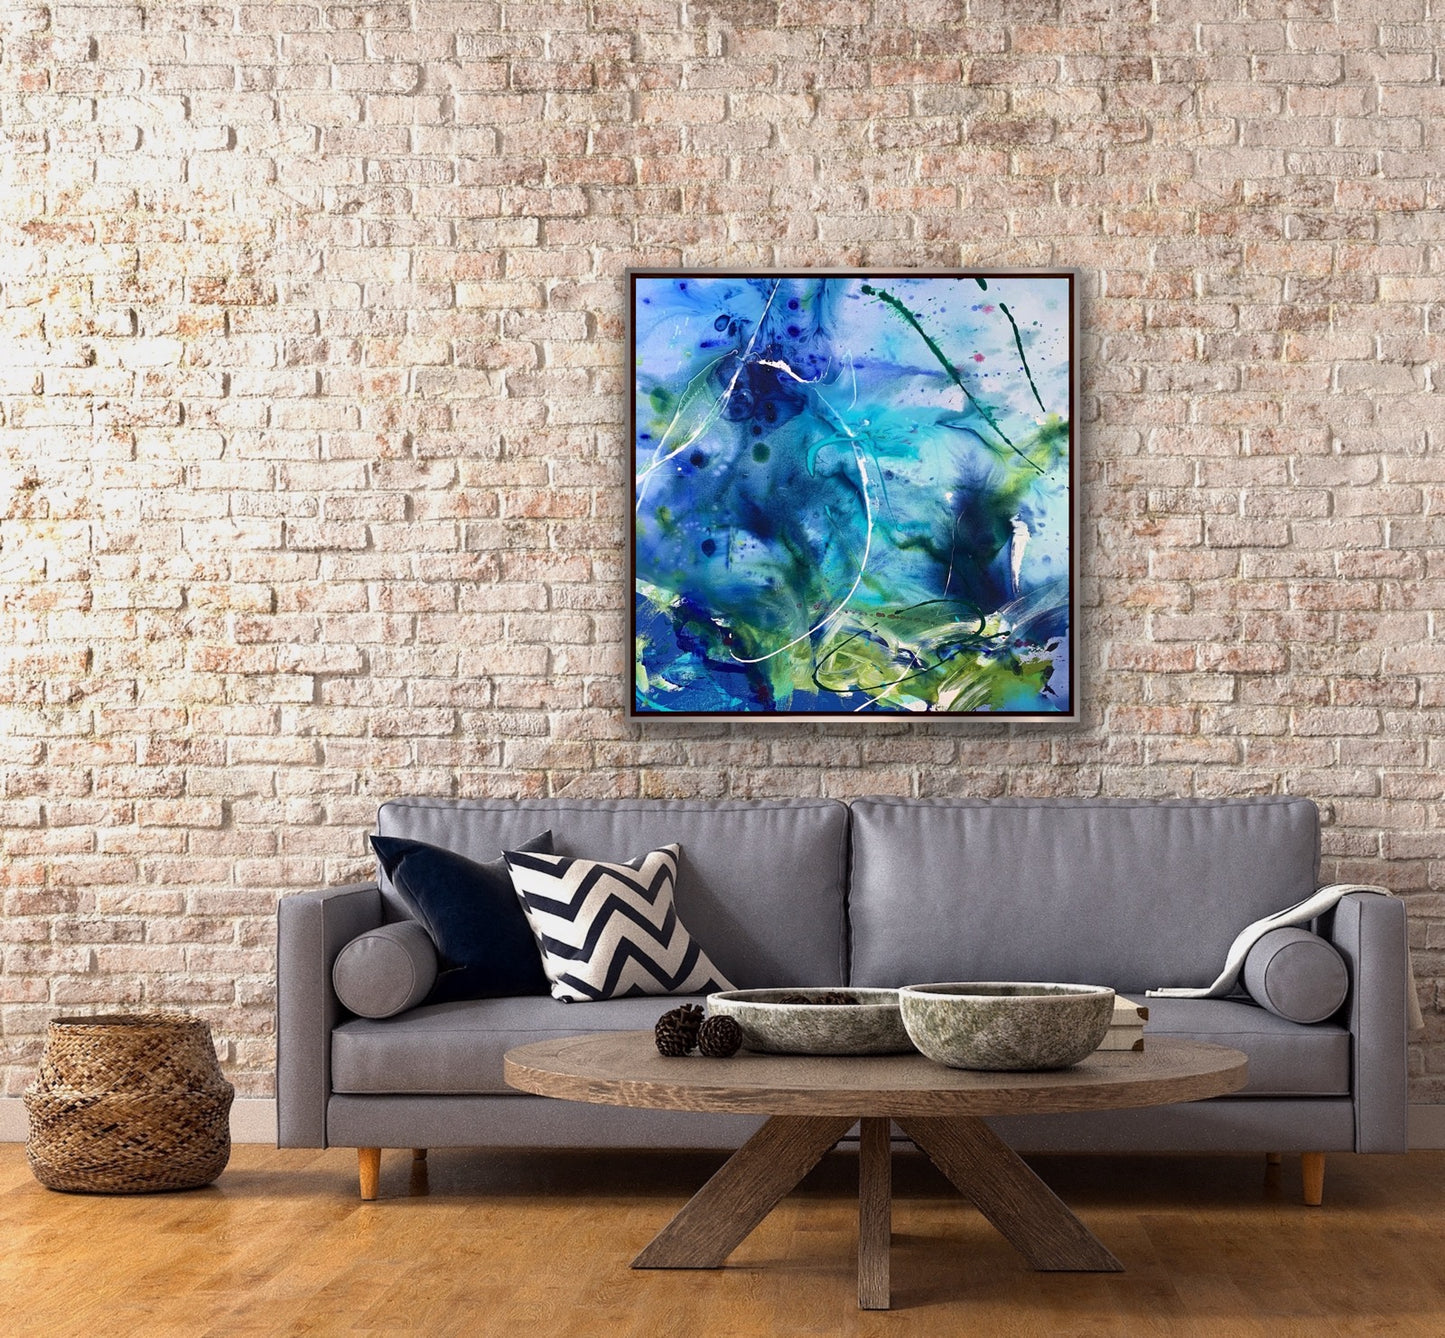 abstract acrylic painting named Chimeras in soft tones of blues in a room with a grey sofa and round table.